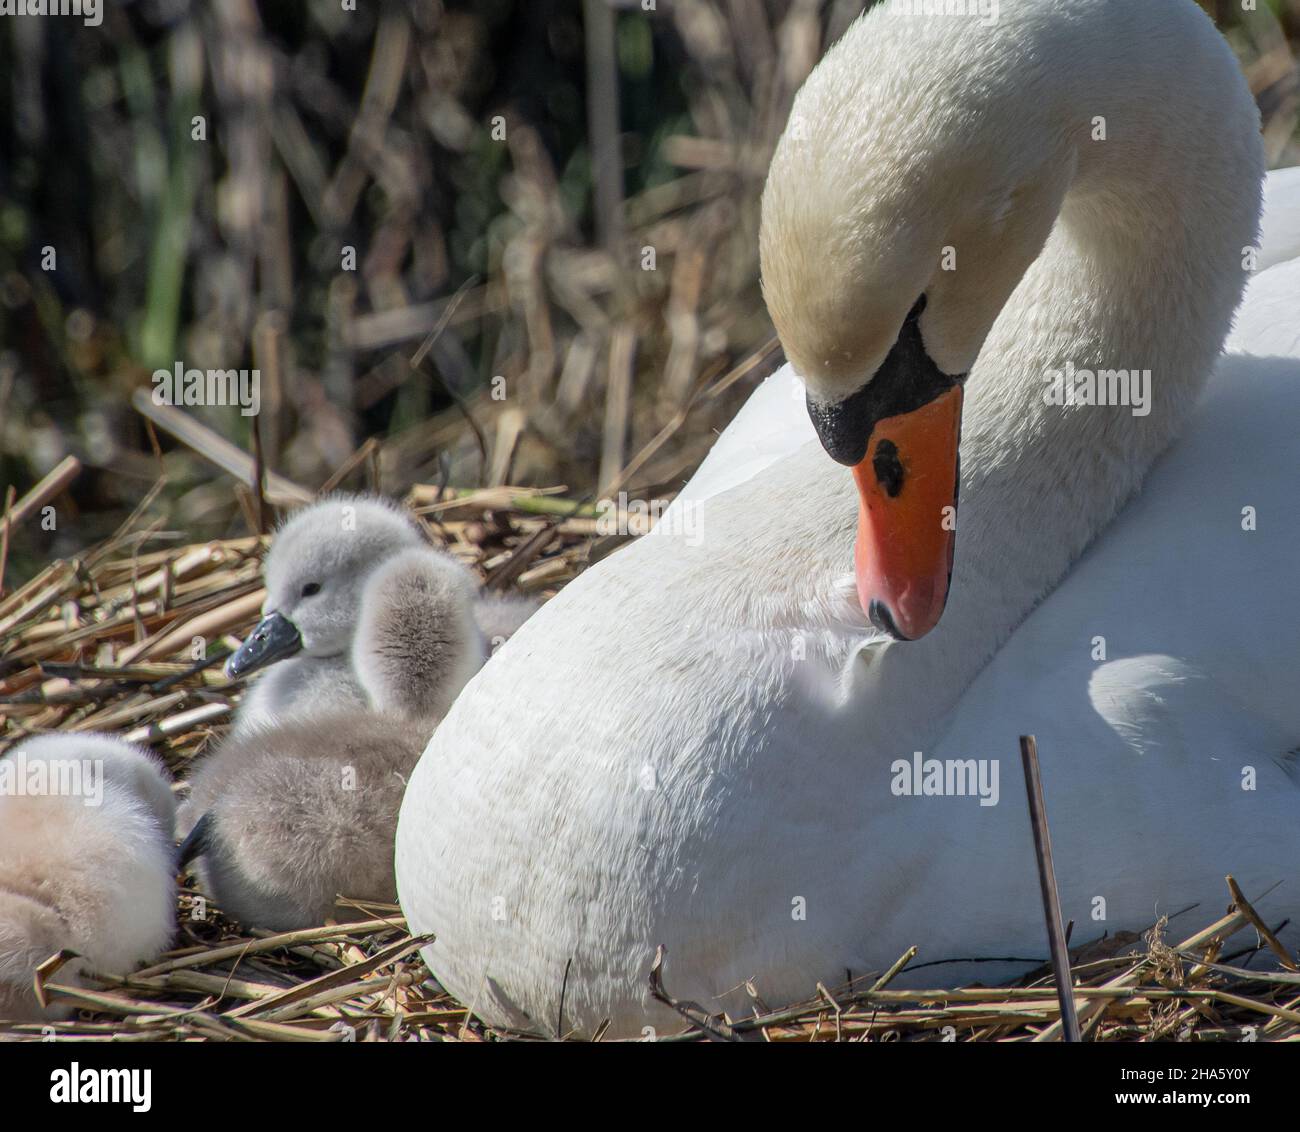 Adult Mute Swan preening with cygnets close by.  Closeup. Stock Photo